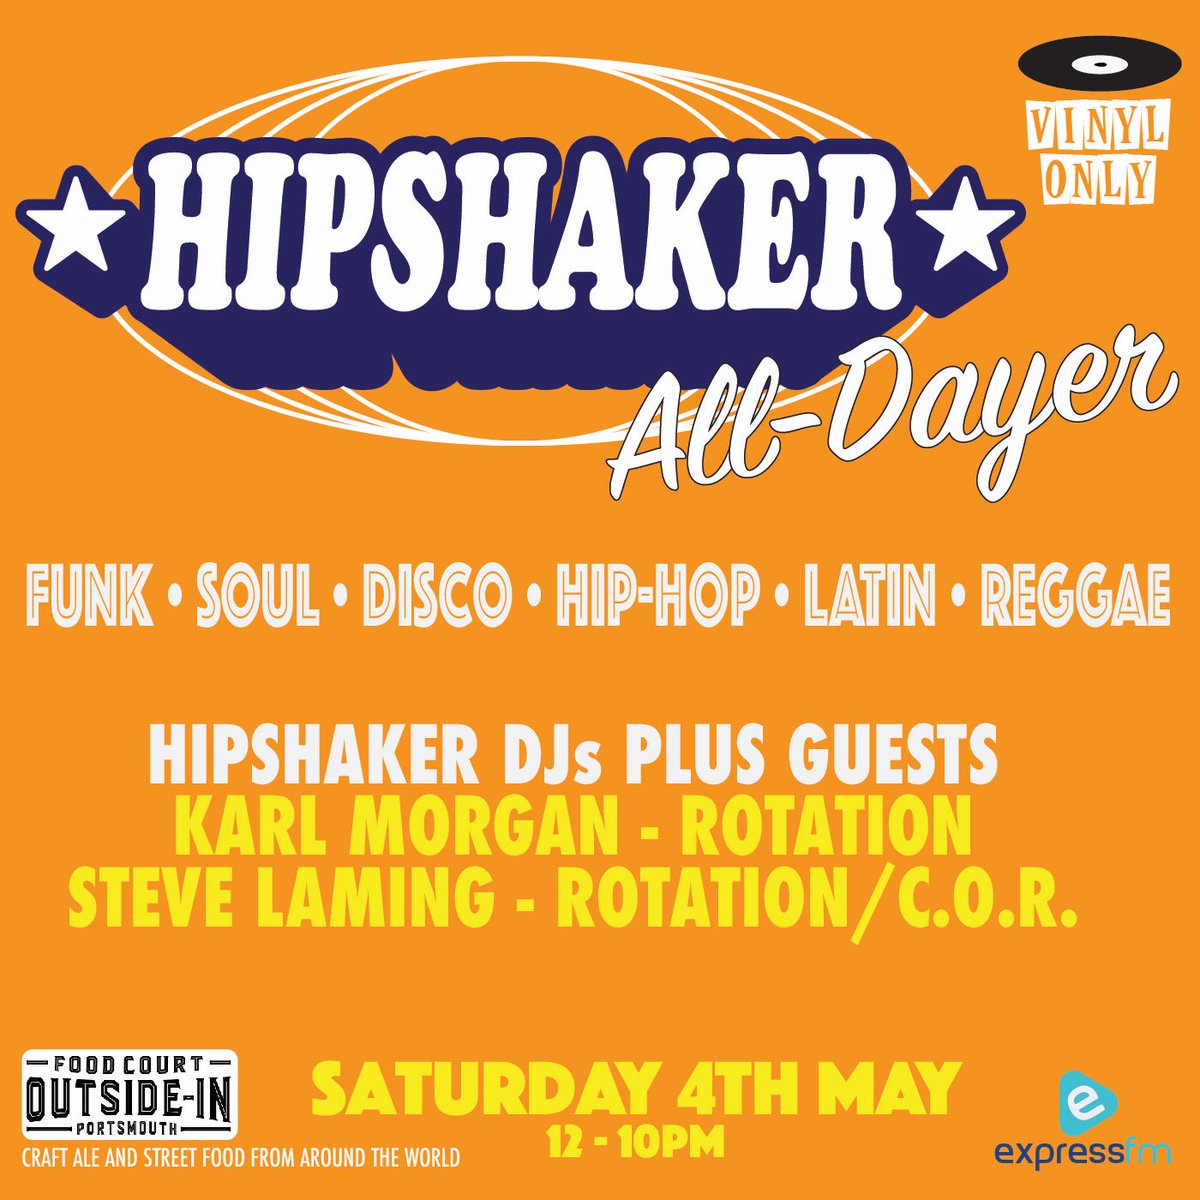 We’re a week away from our next alldayer at Outside-In Food Court …. As always it’s great food and drink, a lovely chilled atmosphere and top guest DJs … we kick off at midday, come on down 😁